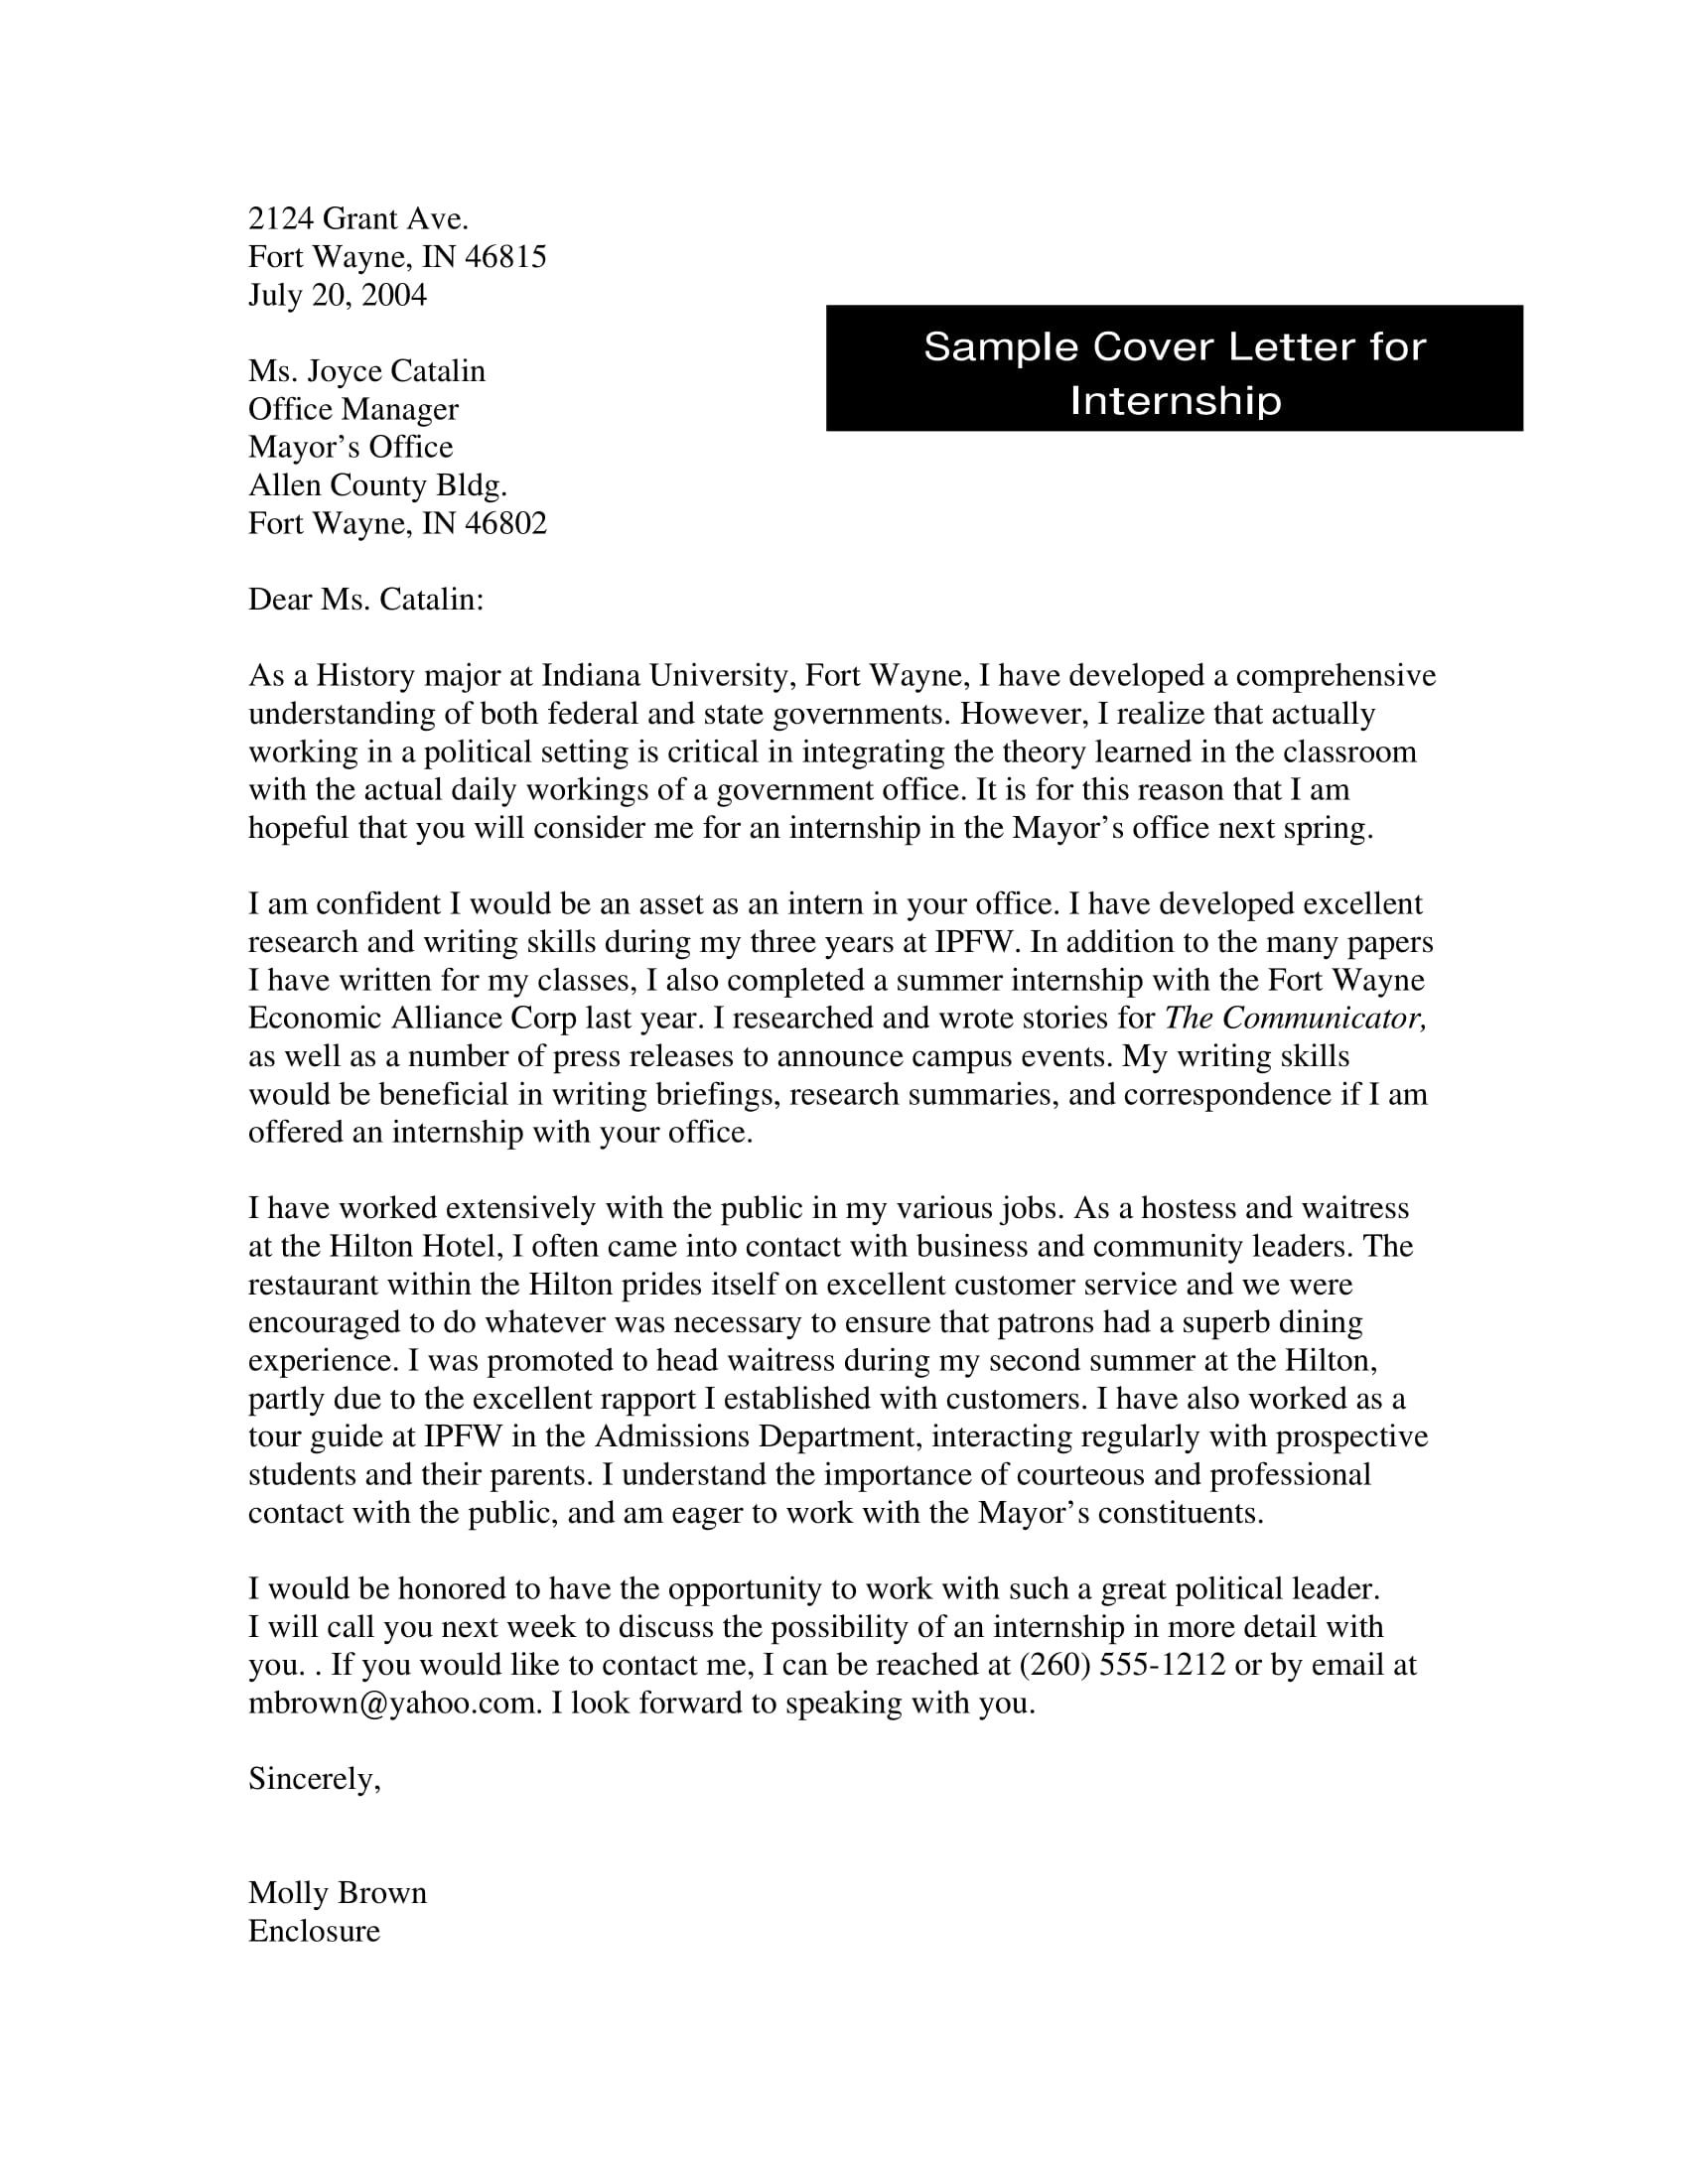 spring internship cover letter example